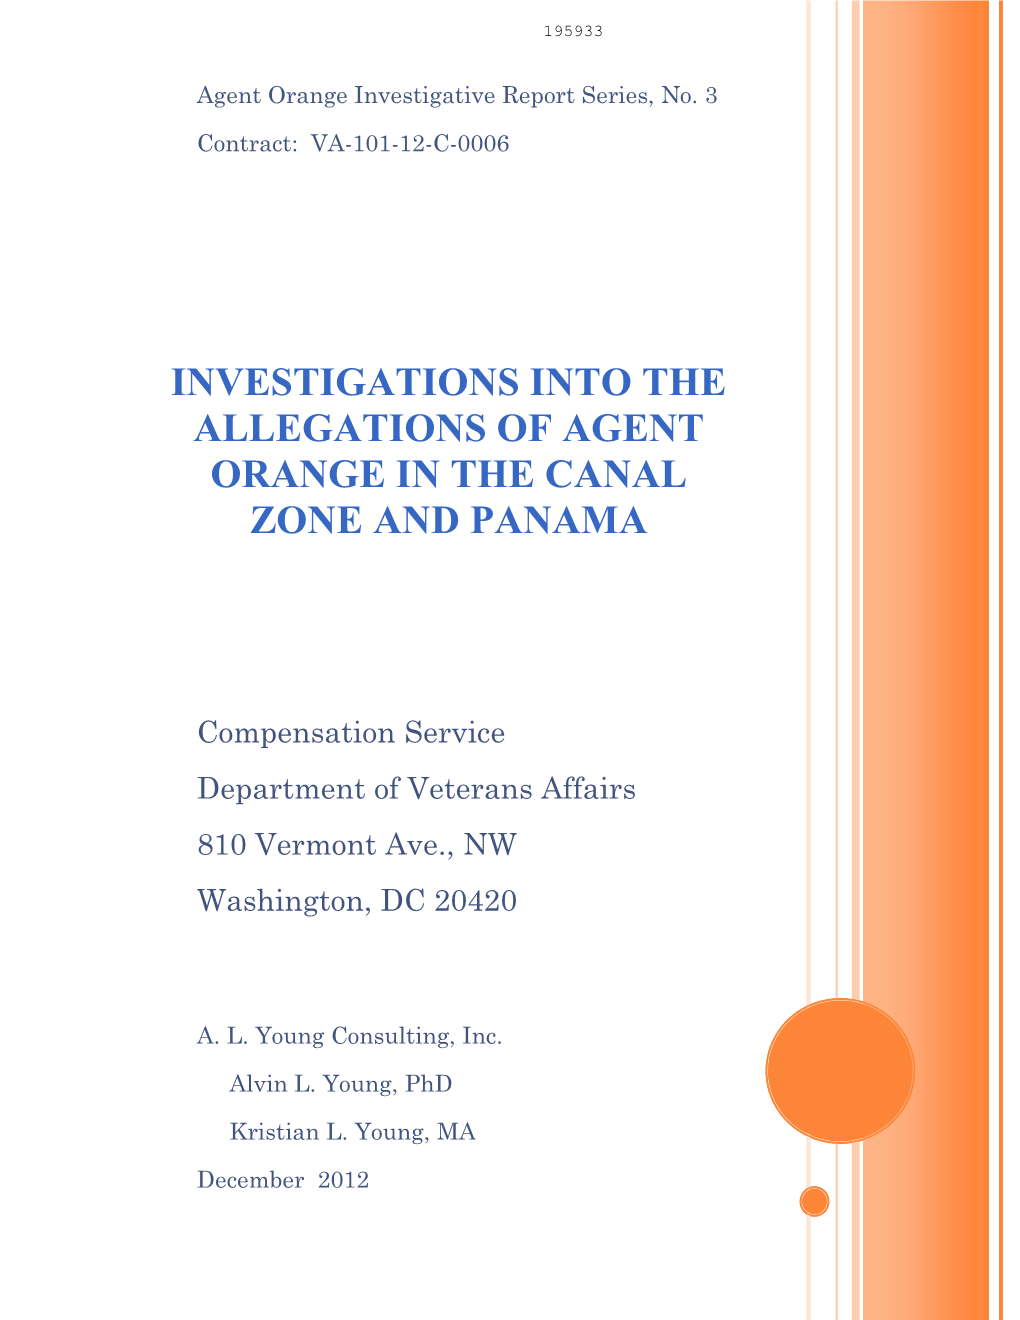 Investigations Into Allegations of Agent Orange in the Canal Zone